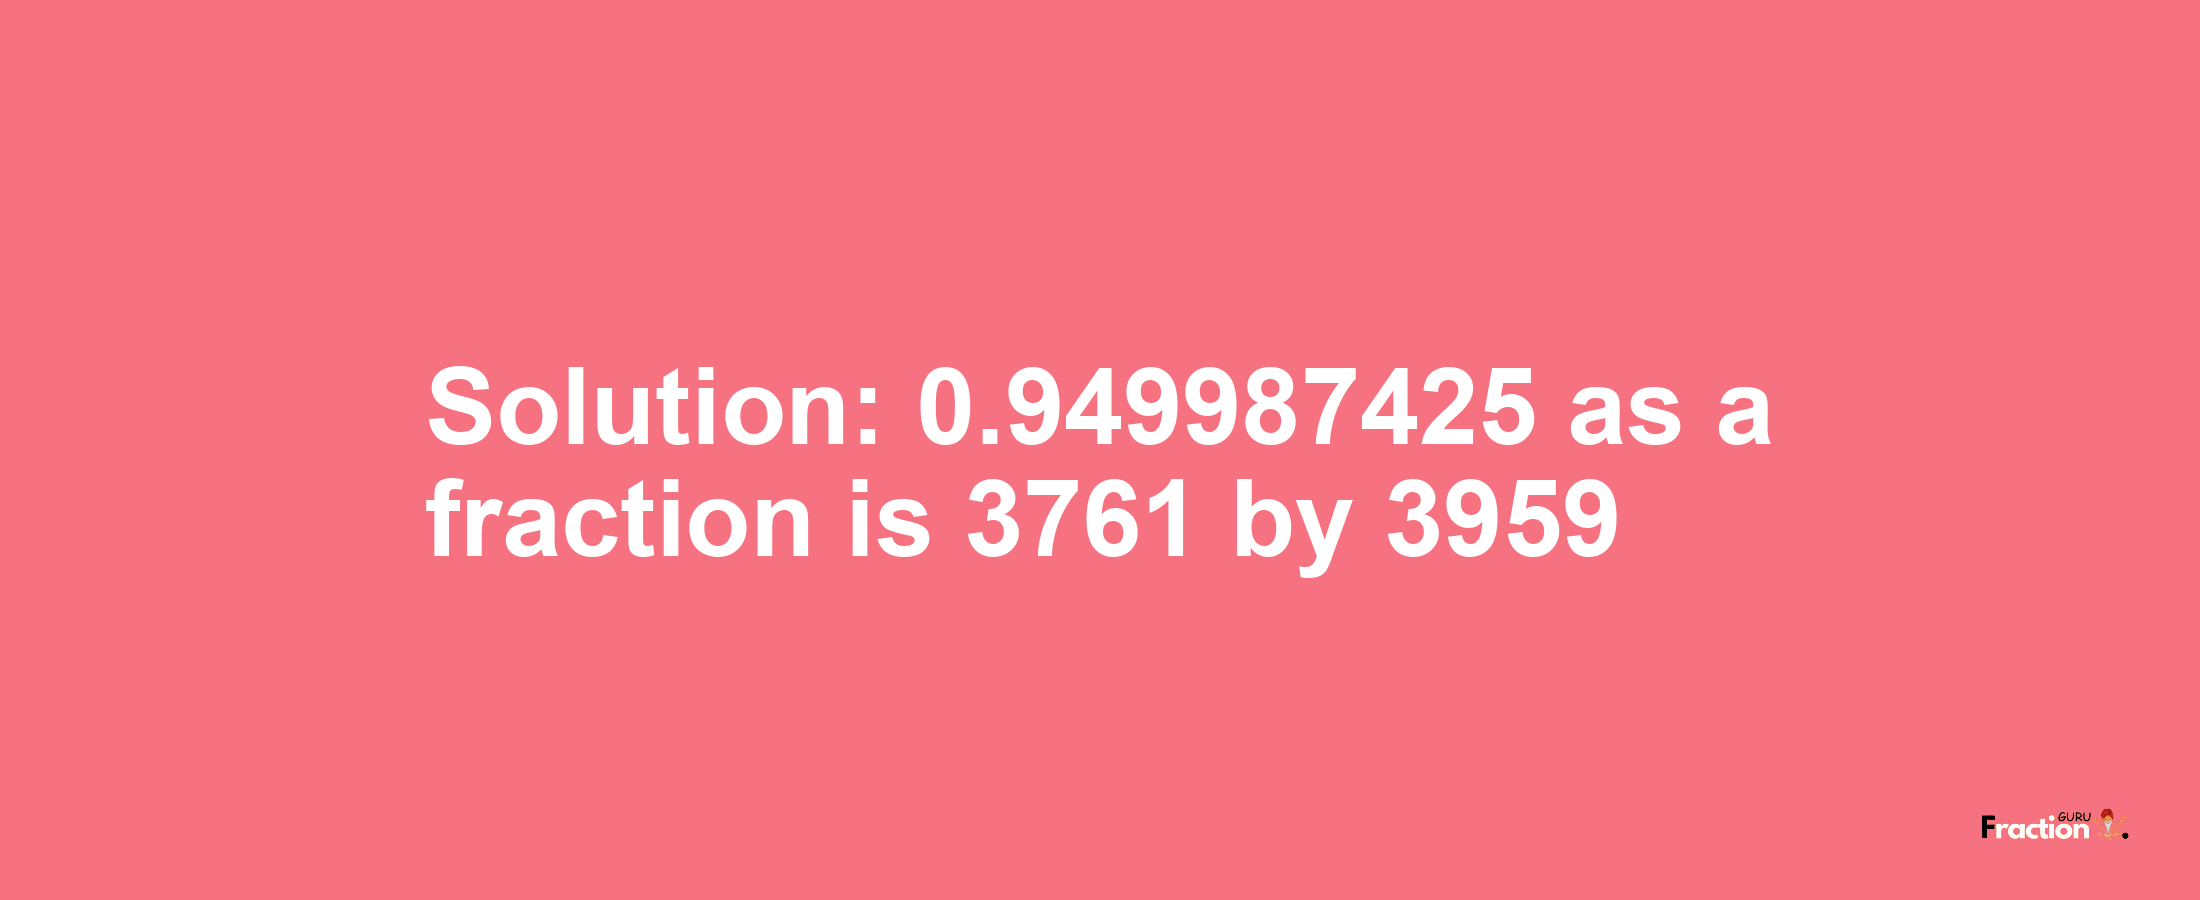 Solution:0.949987425 as a fraction is 3761/3959